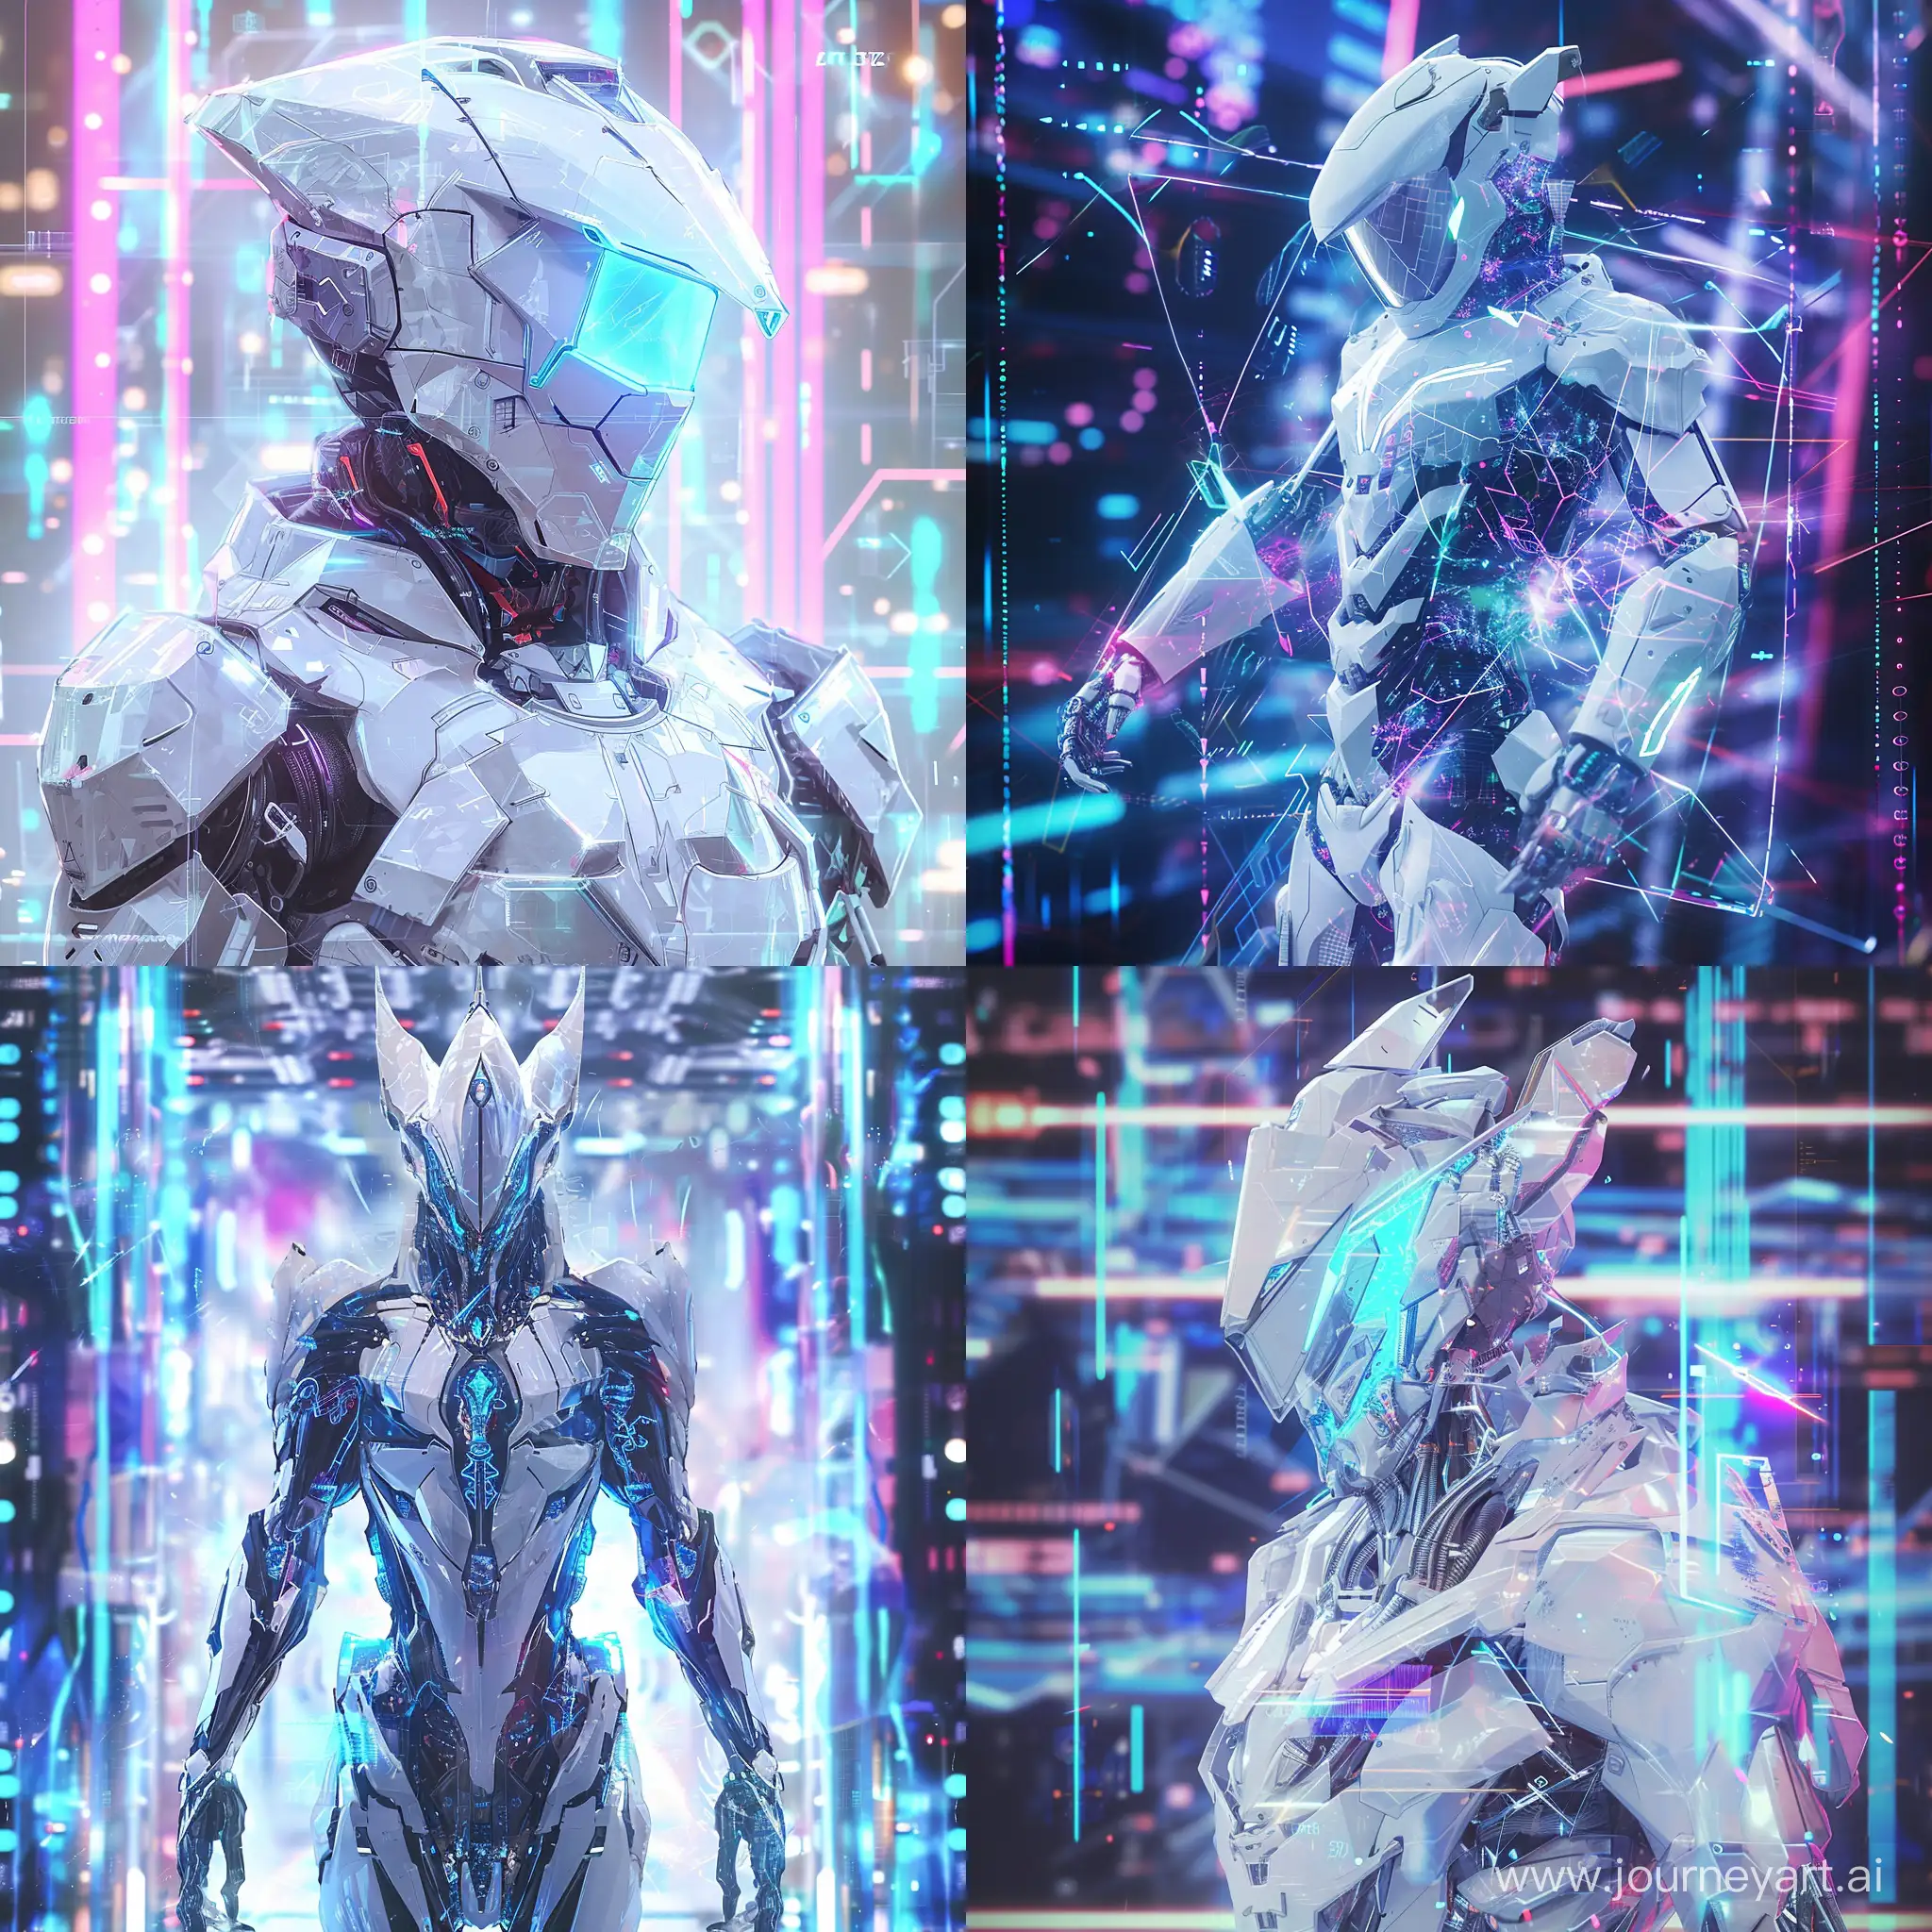 Subject: The main subject of the image is a holographic representation of a cybernetic white knight, emphasizing a futuristic and technologically advanced theme. The hologram is the focal point, creating a visually striking centerpiece. Setting: The setting is a sci-fi environment, characterized by sleek and minimalist design elements. The use of advanced technology is evident, with holographic projections contributing to the futuristic atmosphere. The color palette likely includes cool tones to enhance the high- tech ambiance. Background: The background is carefully chosen
to complement the sci-fi theme, featuring intricate digital patterns or abstract shapes. These elements contribute to the overall sense of immersion and convey a sense of the digital realm. Style: The style of the image is characterized by a blend of cyberpunk aesthetics and futuristic elements. The cybernetic white knight is likely to have sleek, angular designs, giving it a cutting- edge and modern appearance. Coloring: The color scheme leans towards a palette dominated by blues, purples, and silvers to convey a sense of technological sophistication. Neon accents may be used to add vibrancy and highlight key elements. Action: The holographic white knight may be depicted in a dynamic pose, suggesting readiness for action. This adds an element of excitement and energy to the image, engaging viewers and creating a sense of movement. --v 6